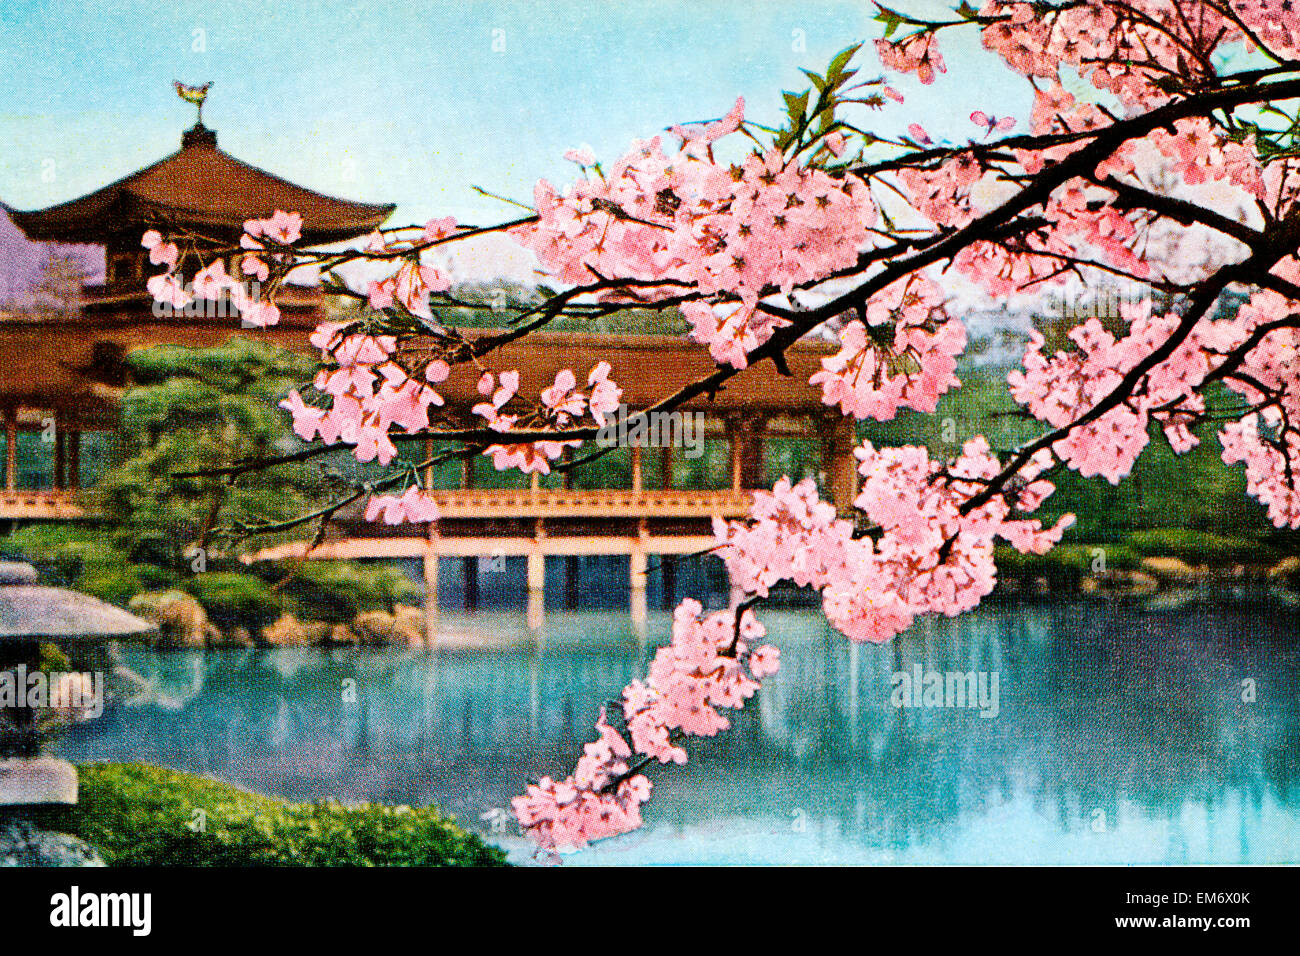 Cherry blossoms and a buddhist shrine Stock Photo